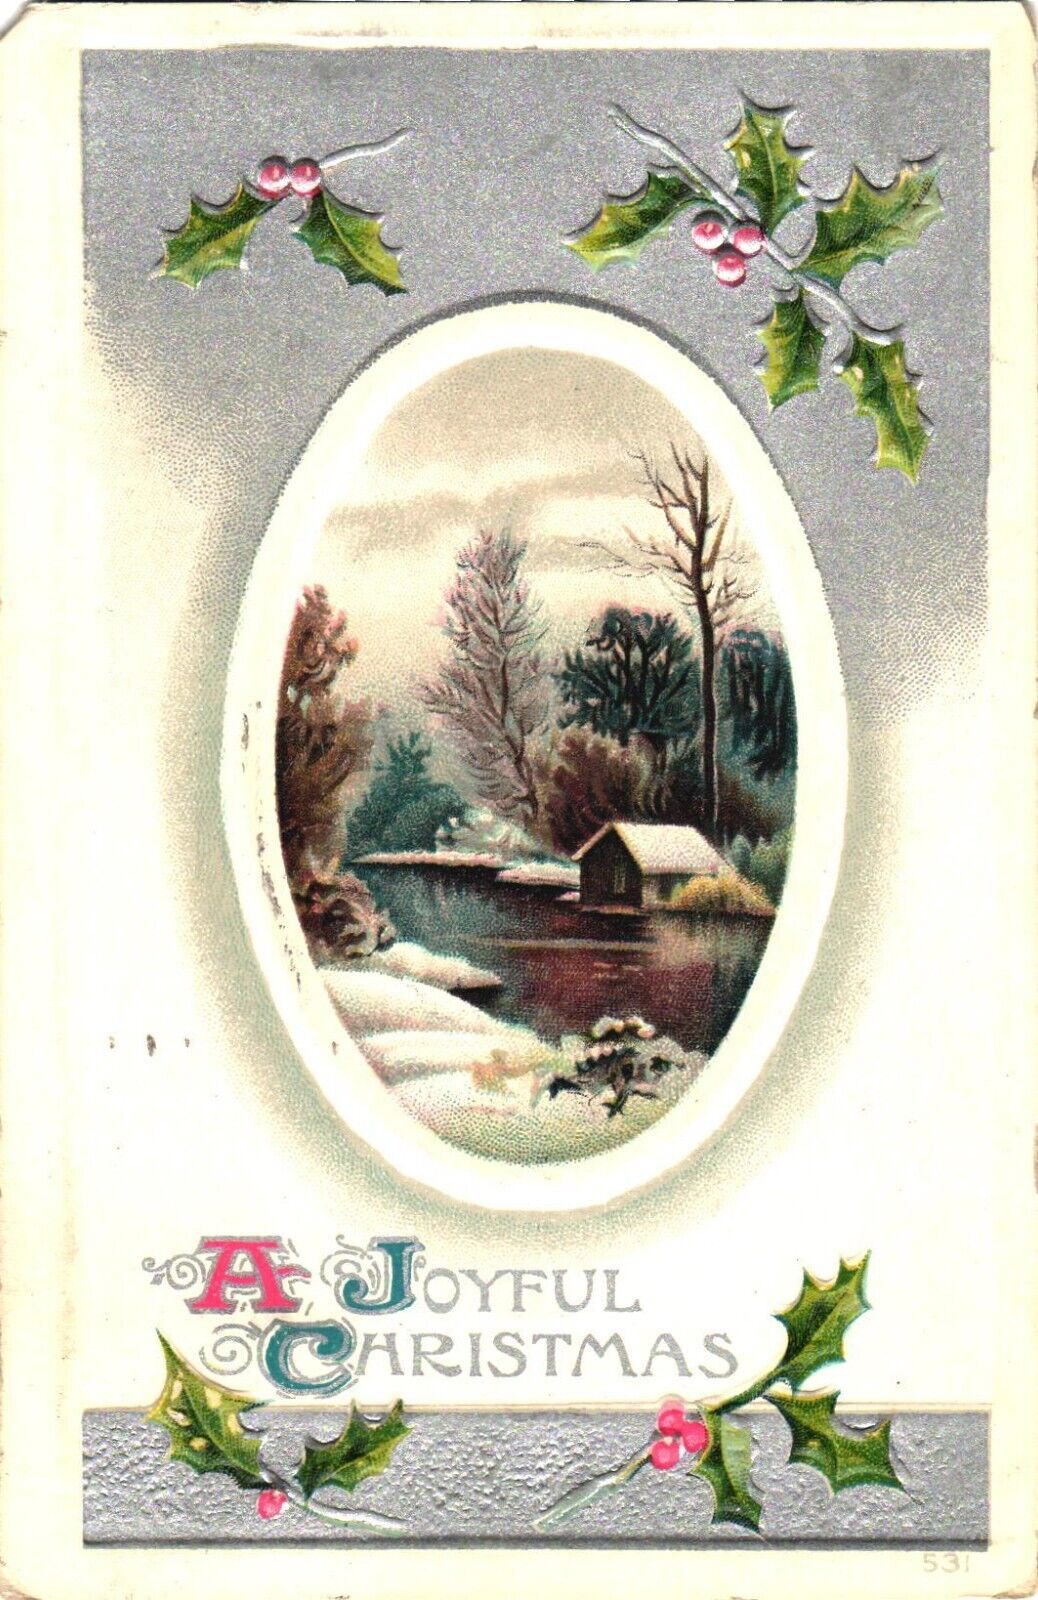 A Small House by The Picturesque Lake, A Joyful Christmas Postcard